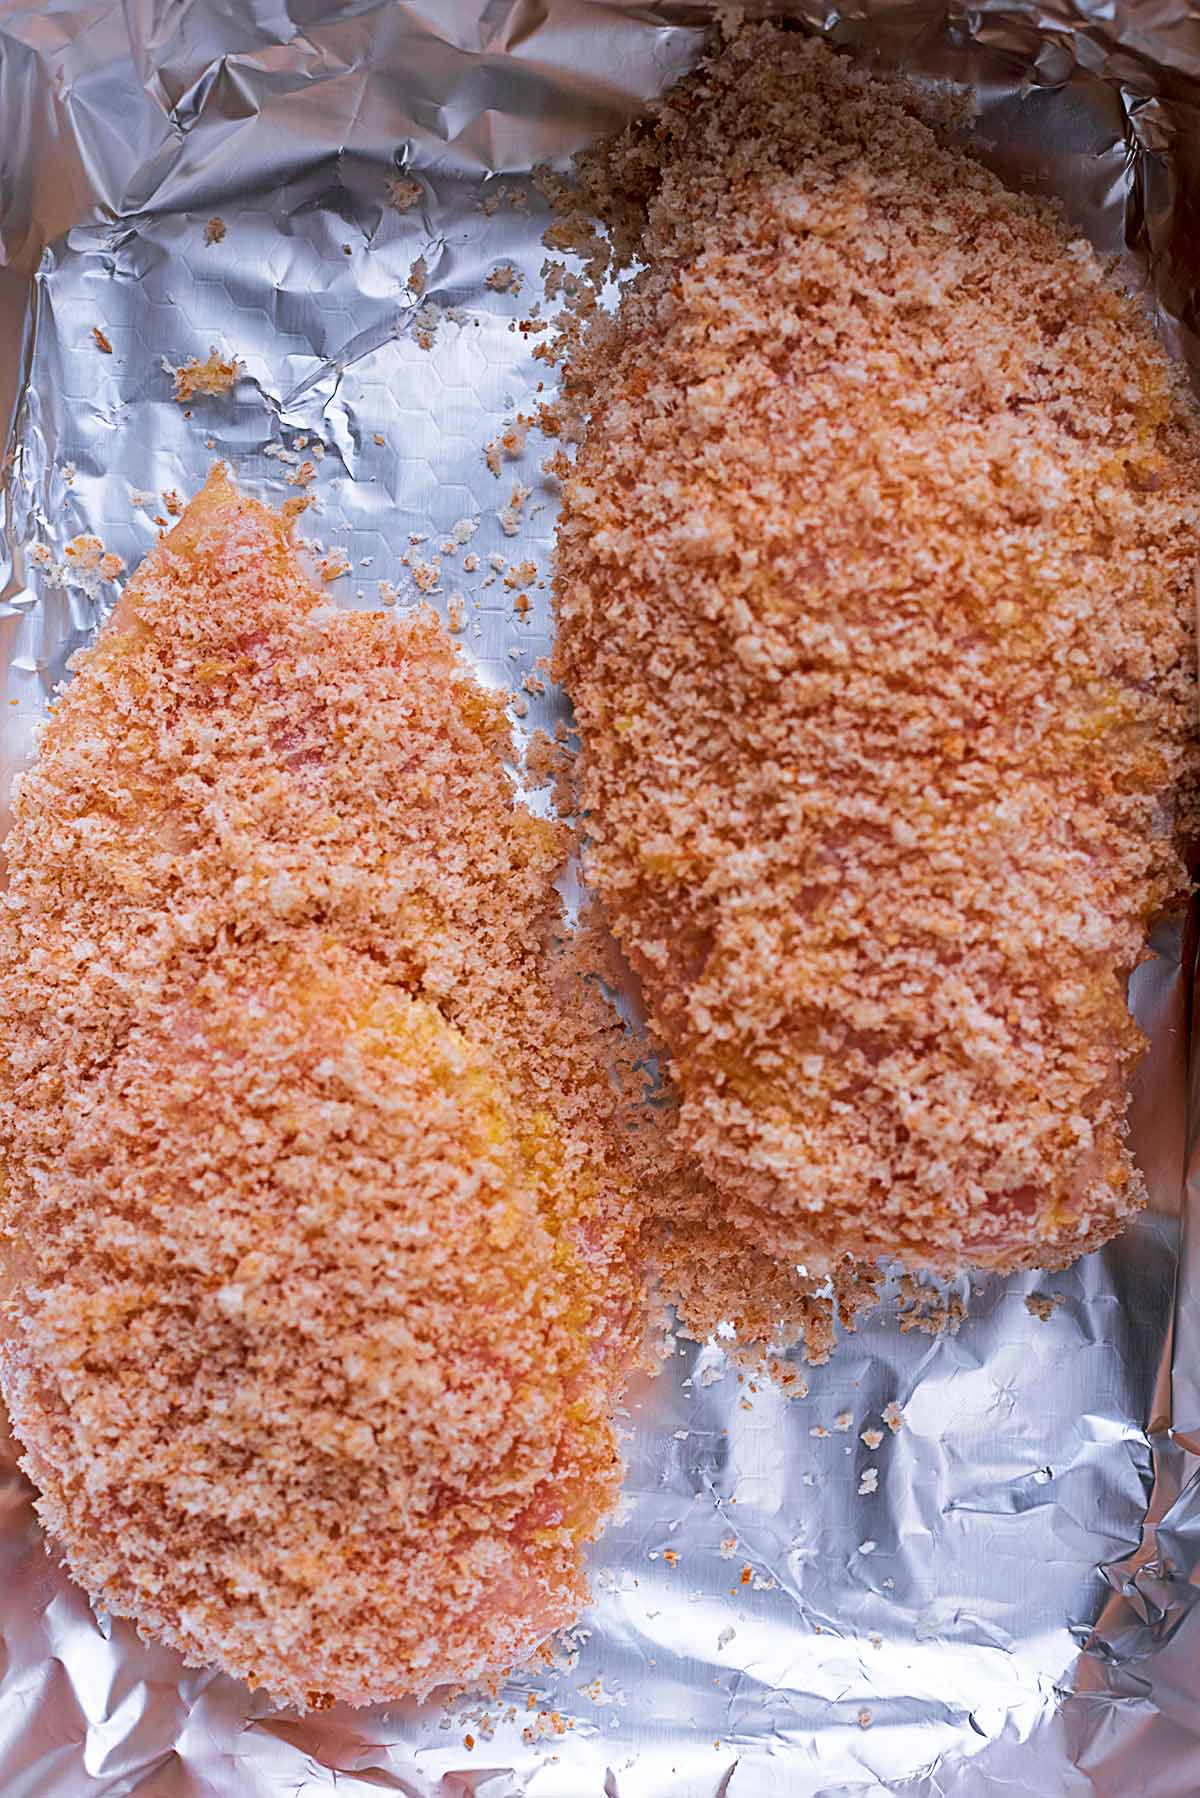 Two chicken breasts coated in bread crumbs on a baking sheet.